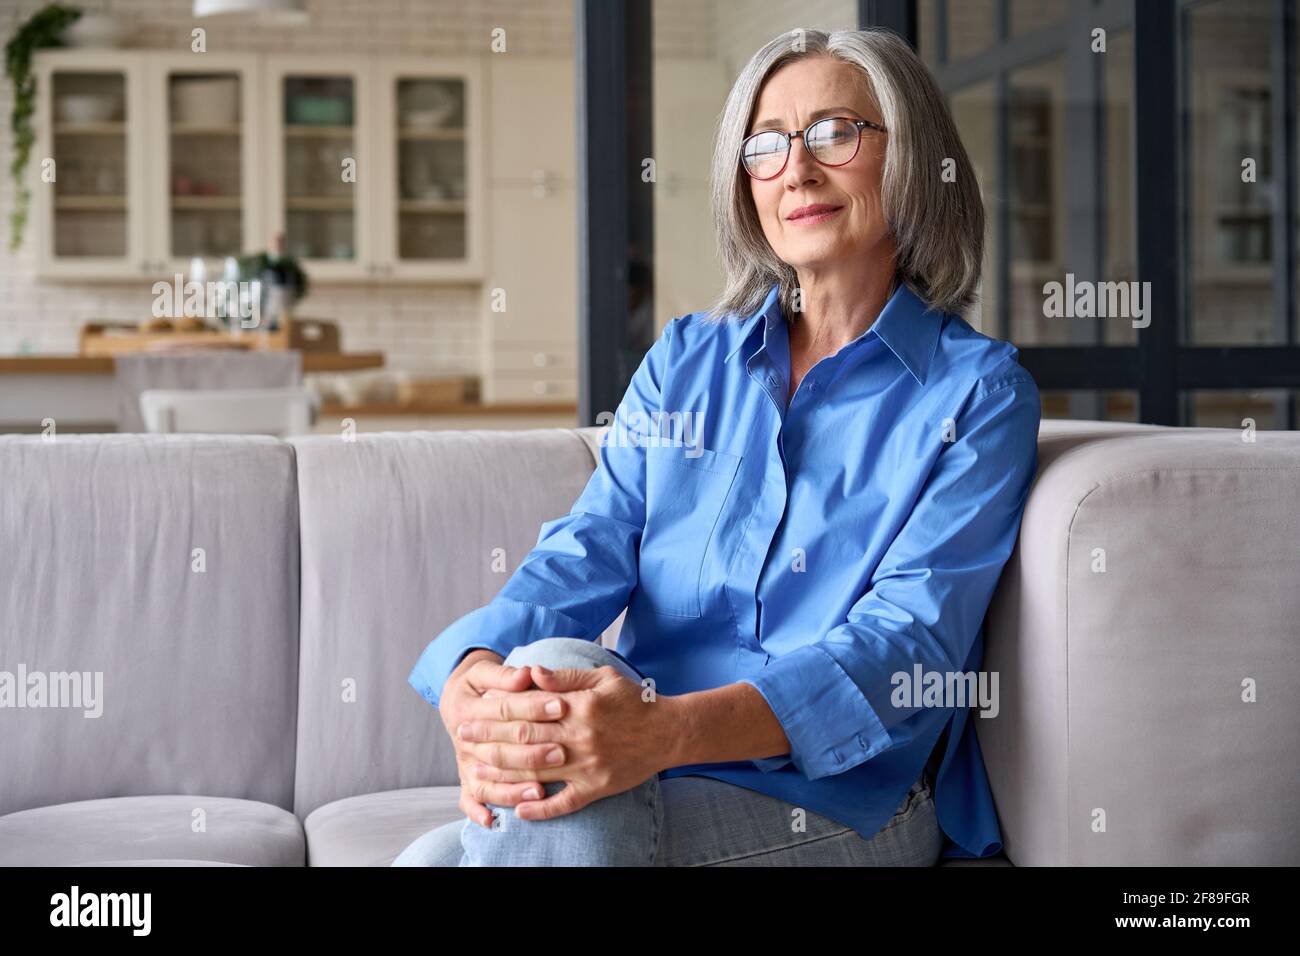 Mature smiling 60s woman portrait at home looking at camera. Stock Photo